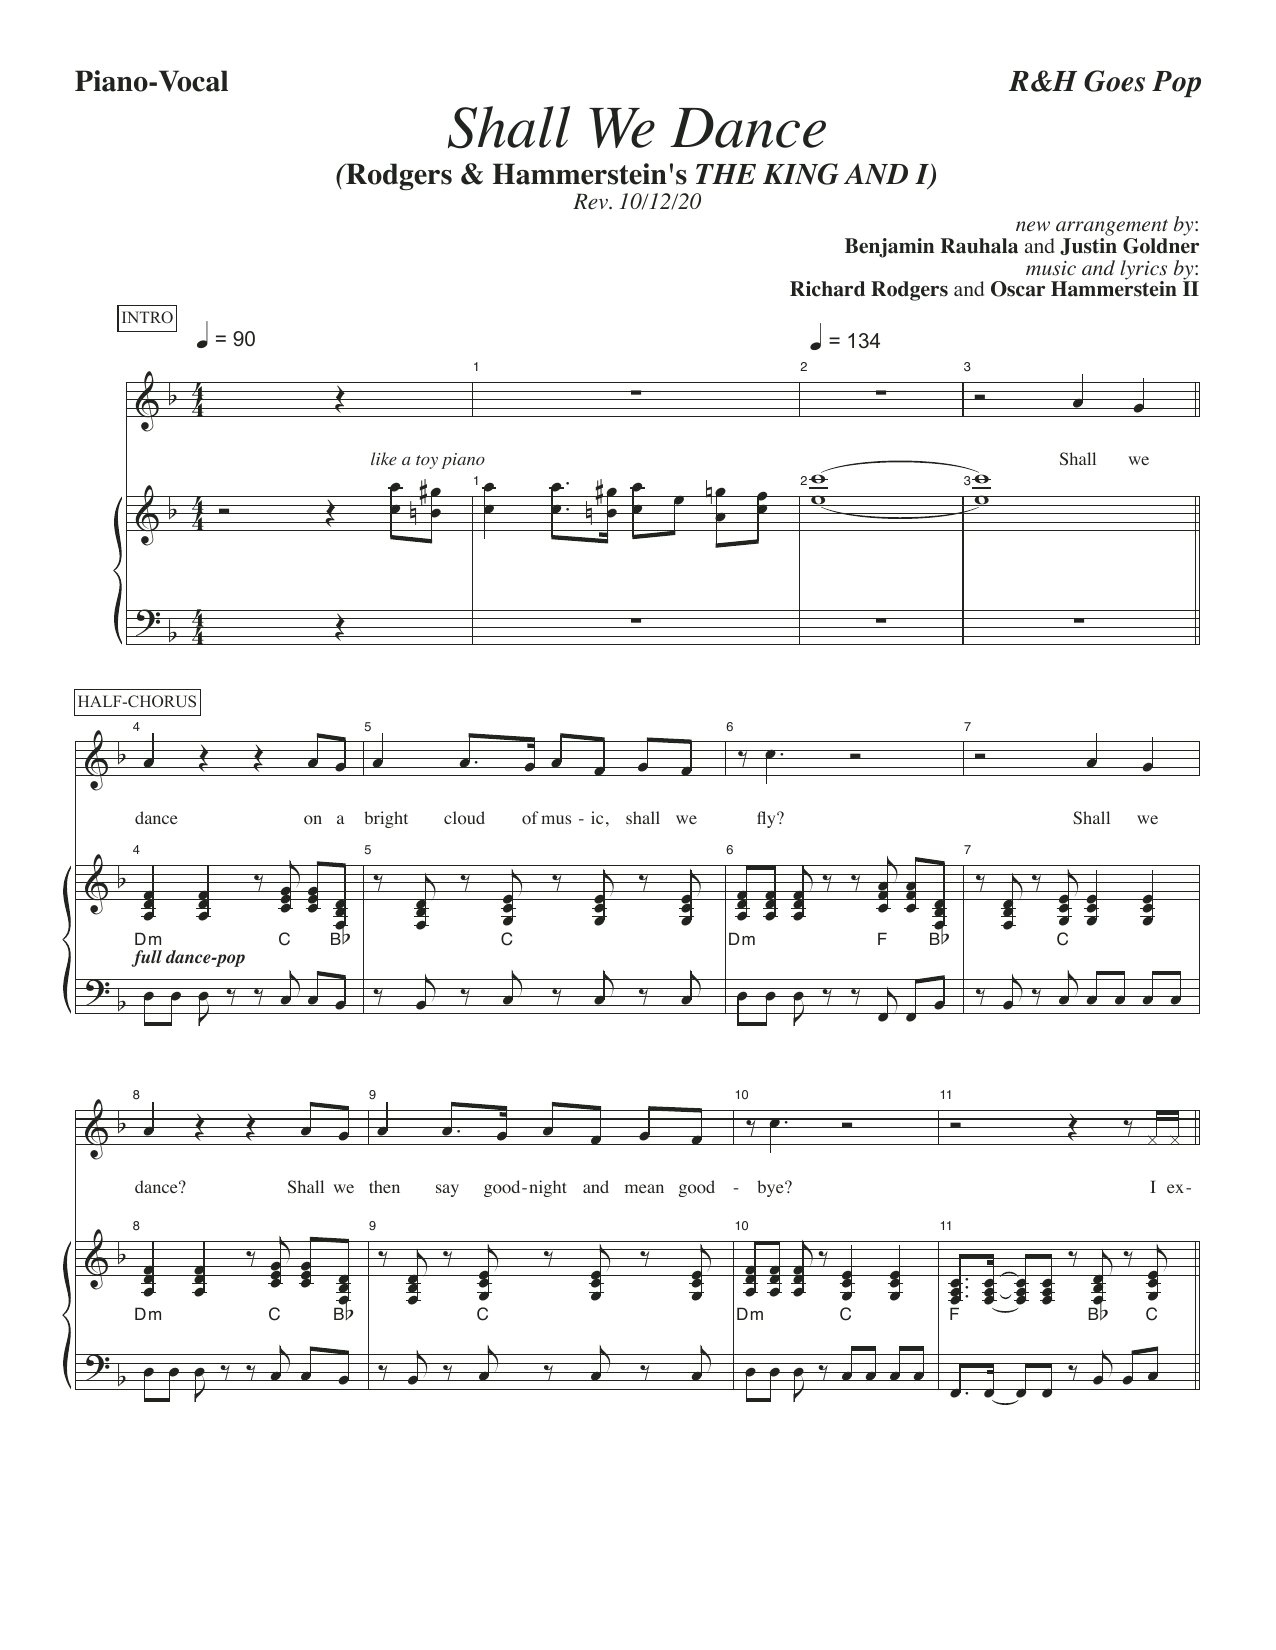 Download Rodgers & Hammerstein Shall We Dance? [R&H Goes Pop! version] Sheet Music